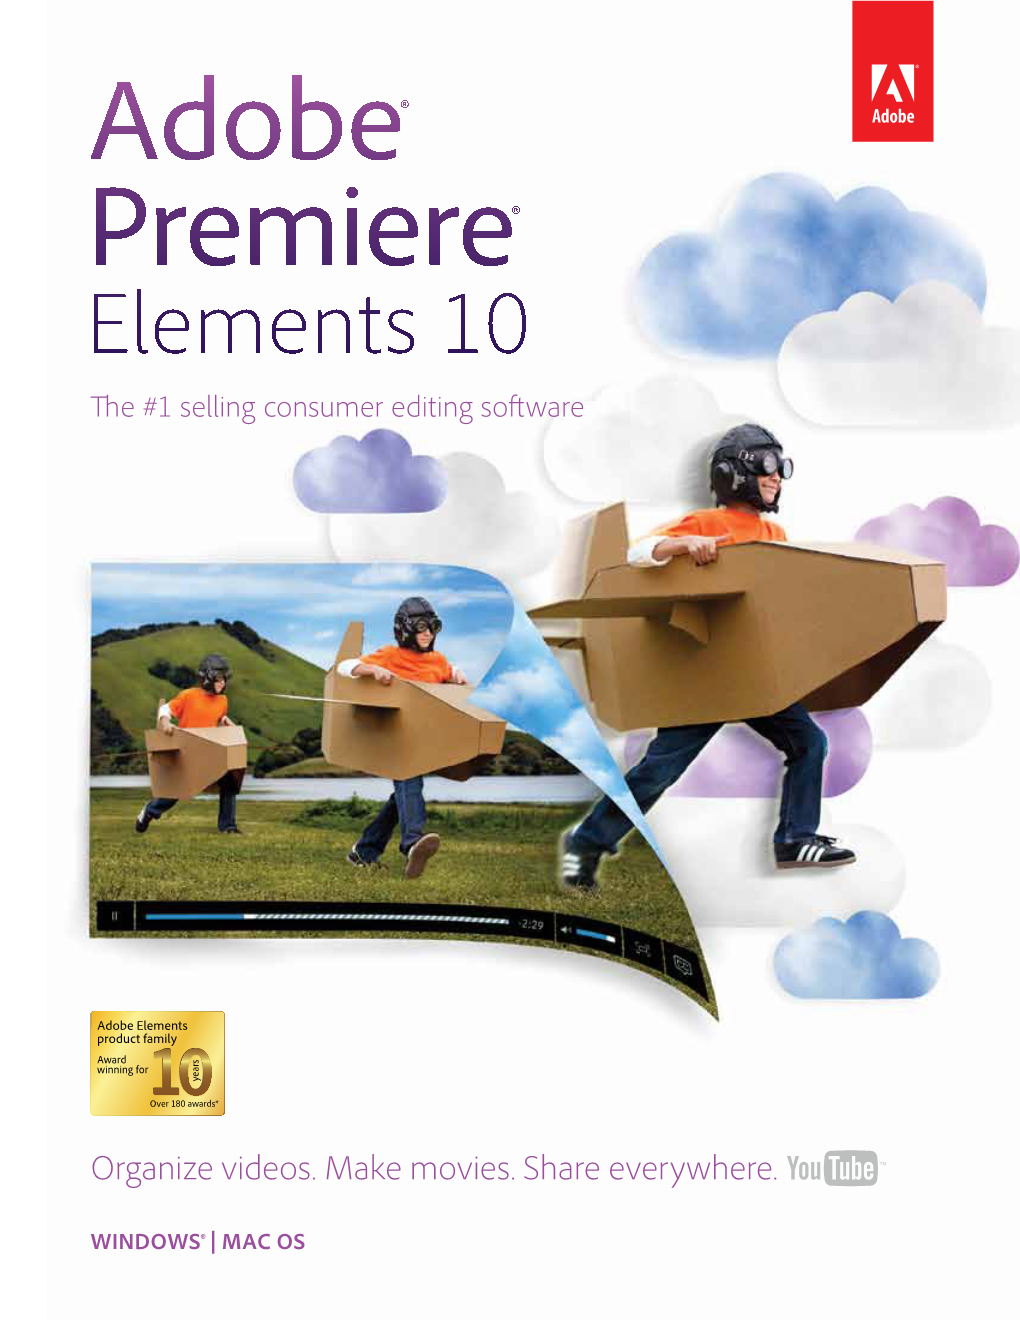 Adobe Premiere Elements 10 Product Overview